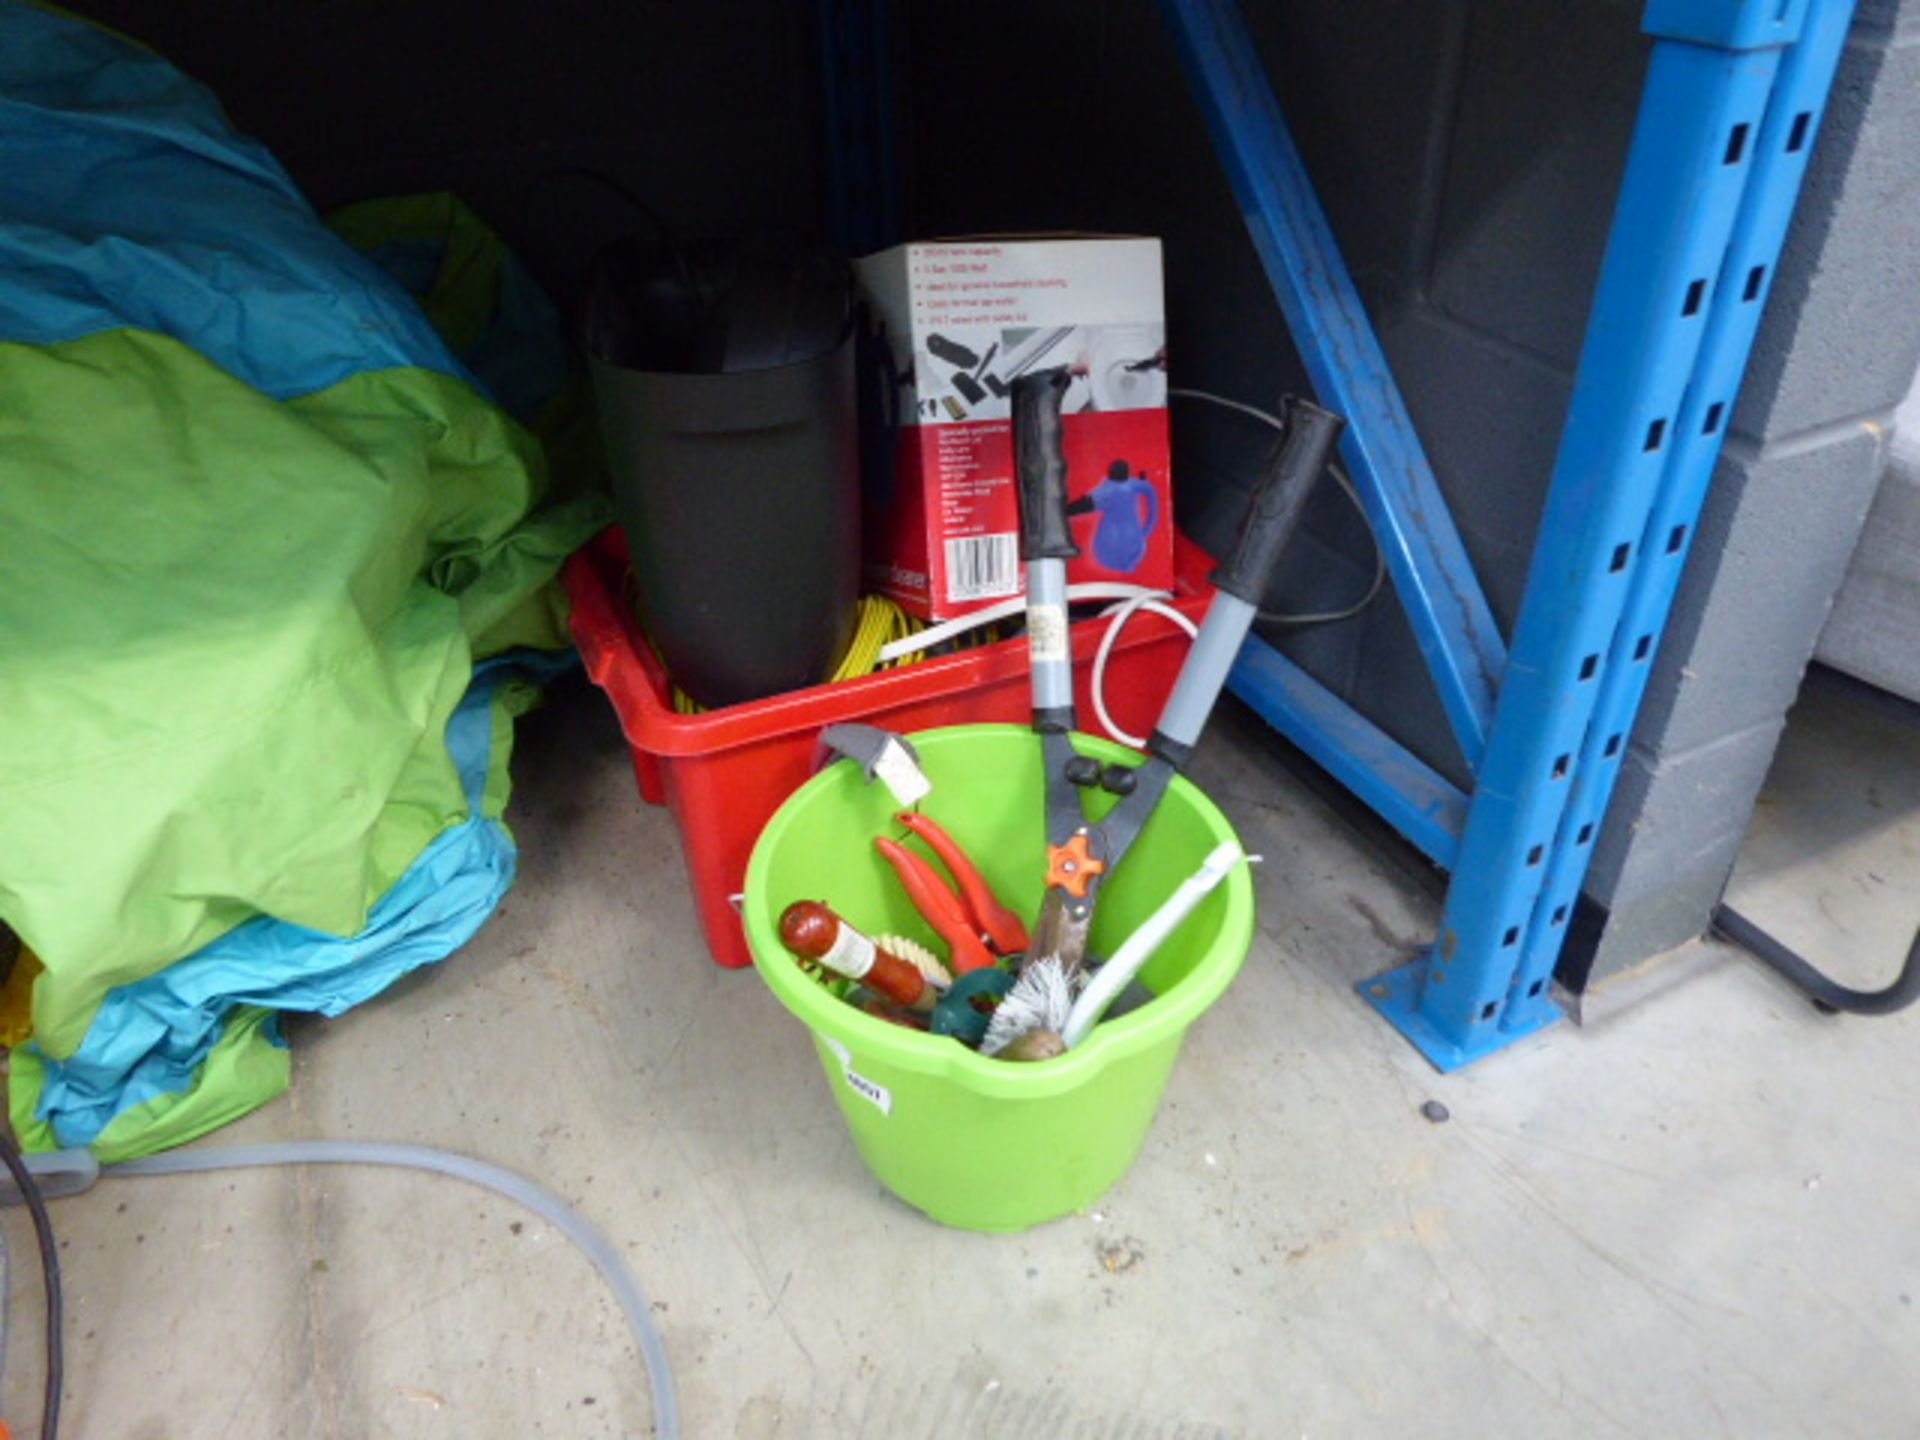 Green bucket of assorted tools and a red plastic box containing; a steamer, cable and small shredder